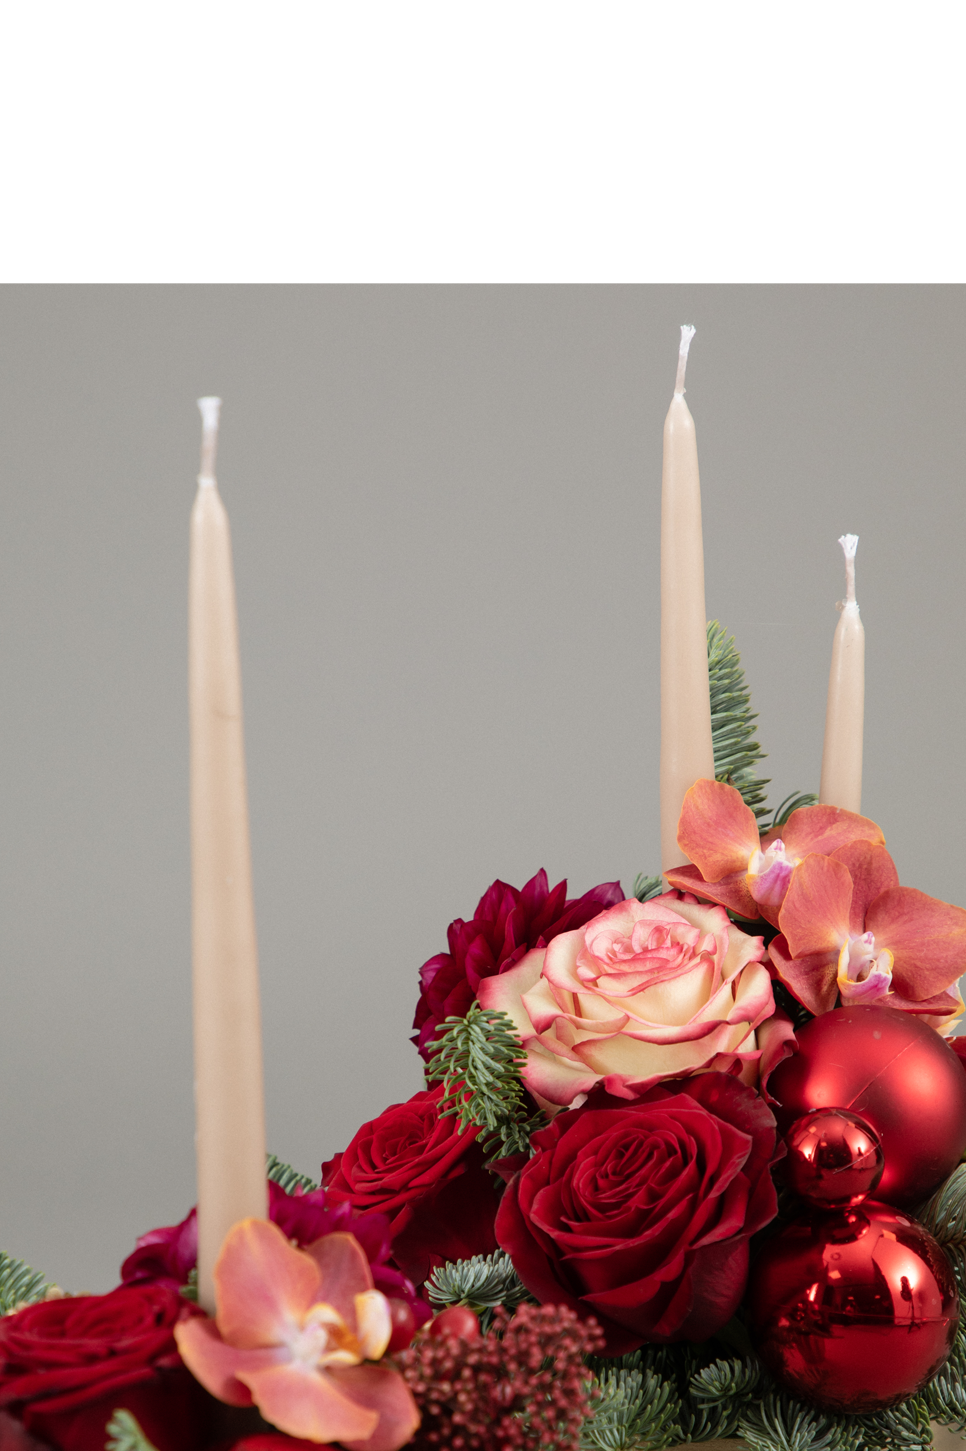 Christmas Floral Designs That Will Get You in That Festive Mood